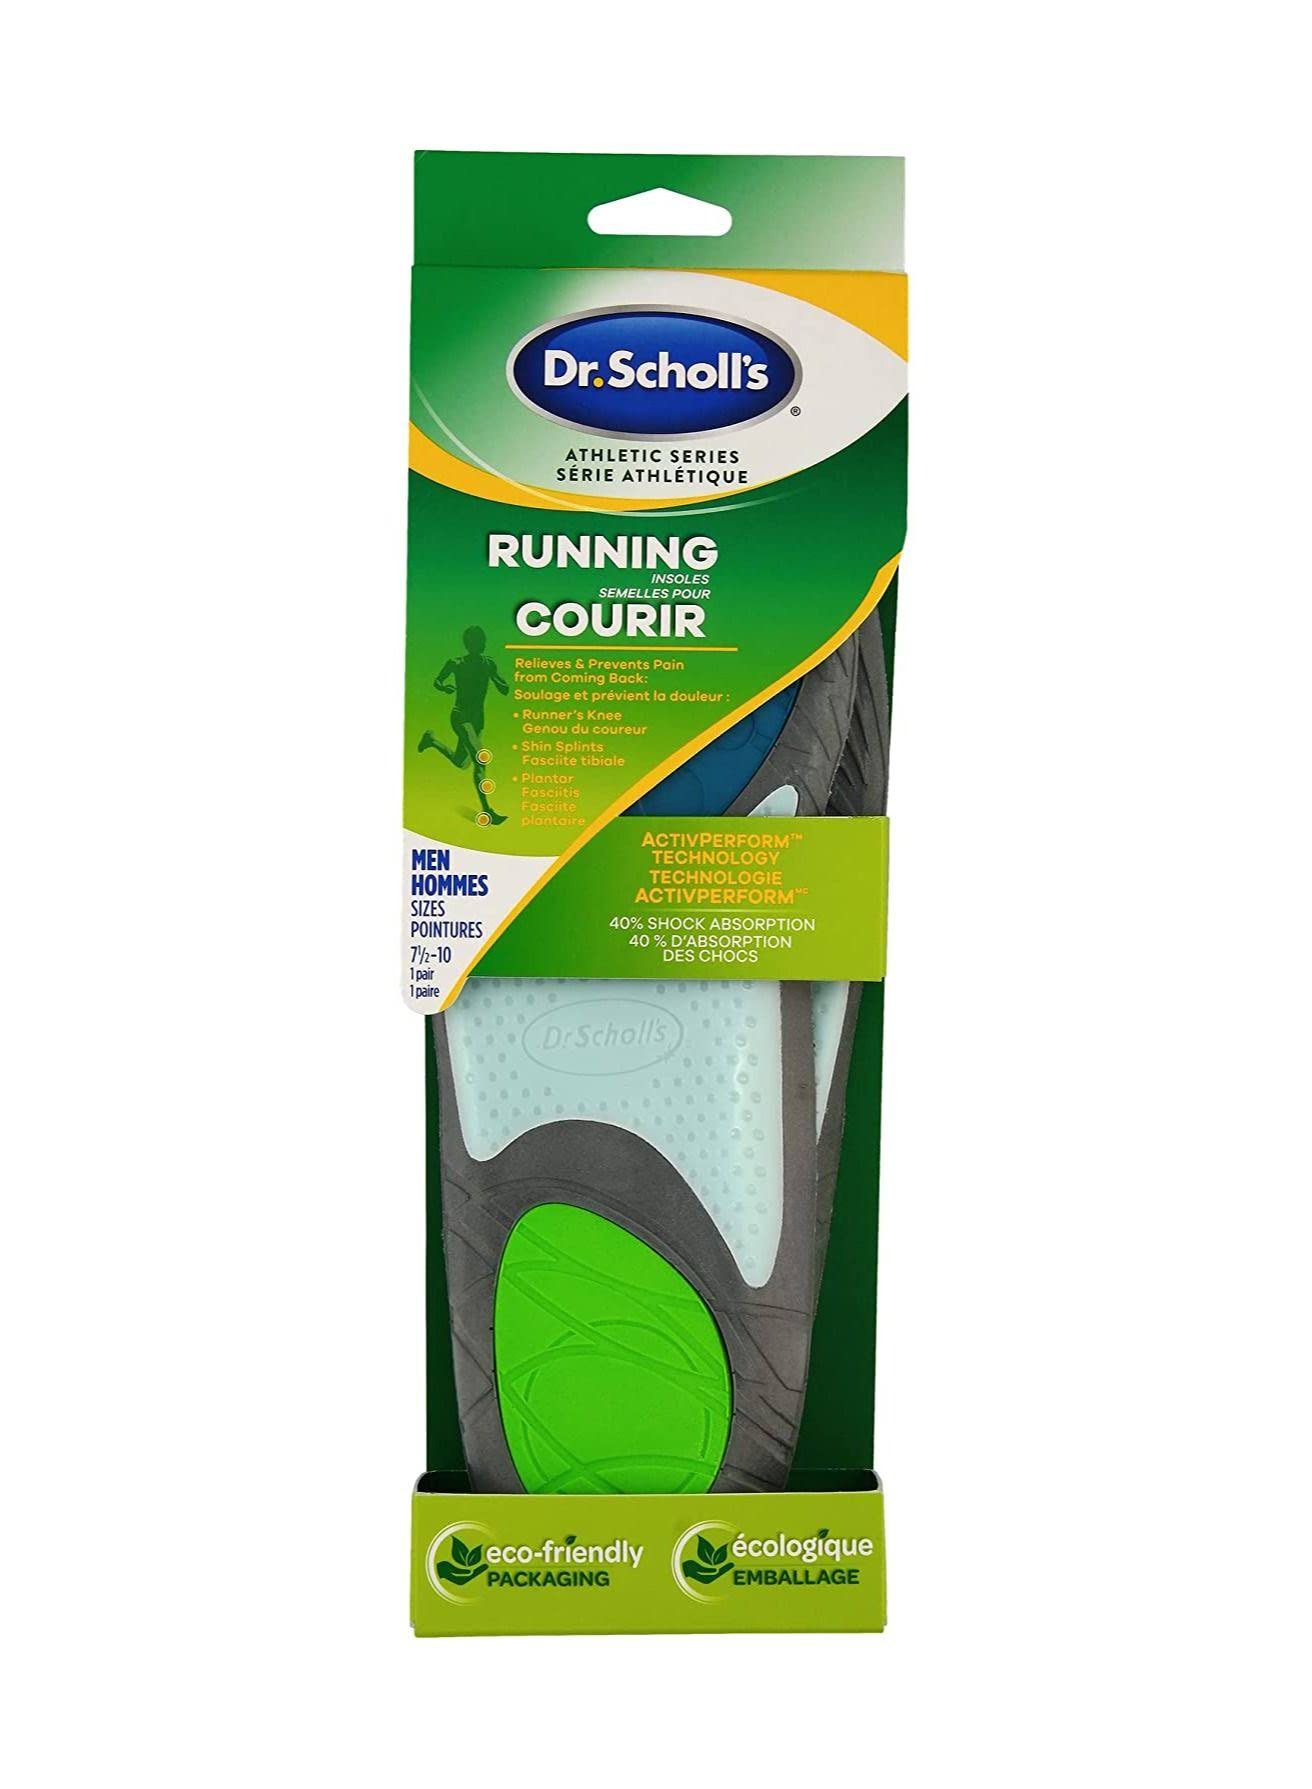 Dr. Scholl's Athletic Series Running Insoles for Men's Sizes 7.5-10